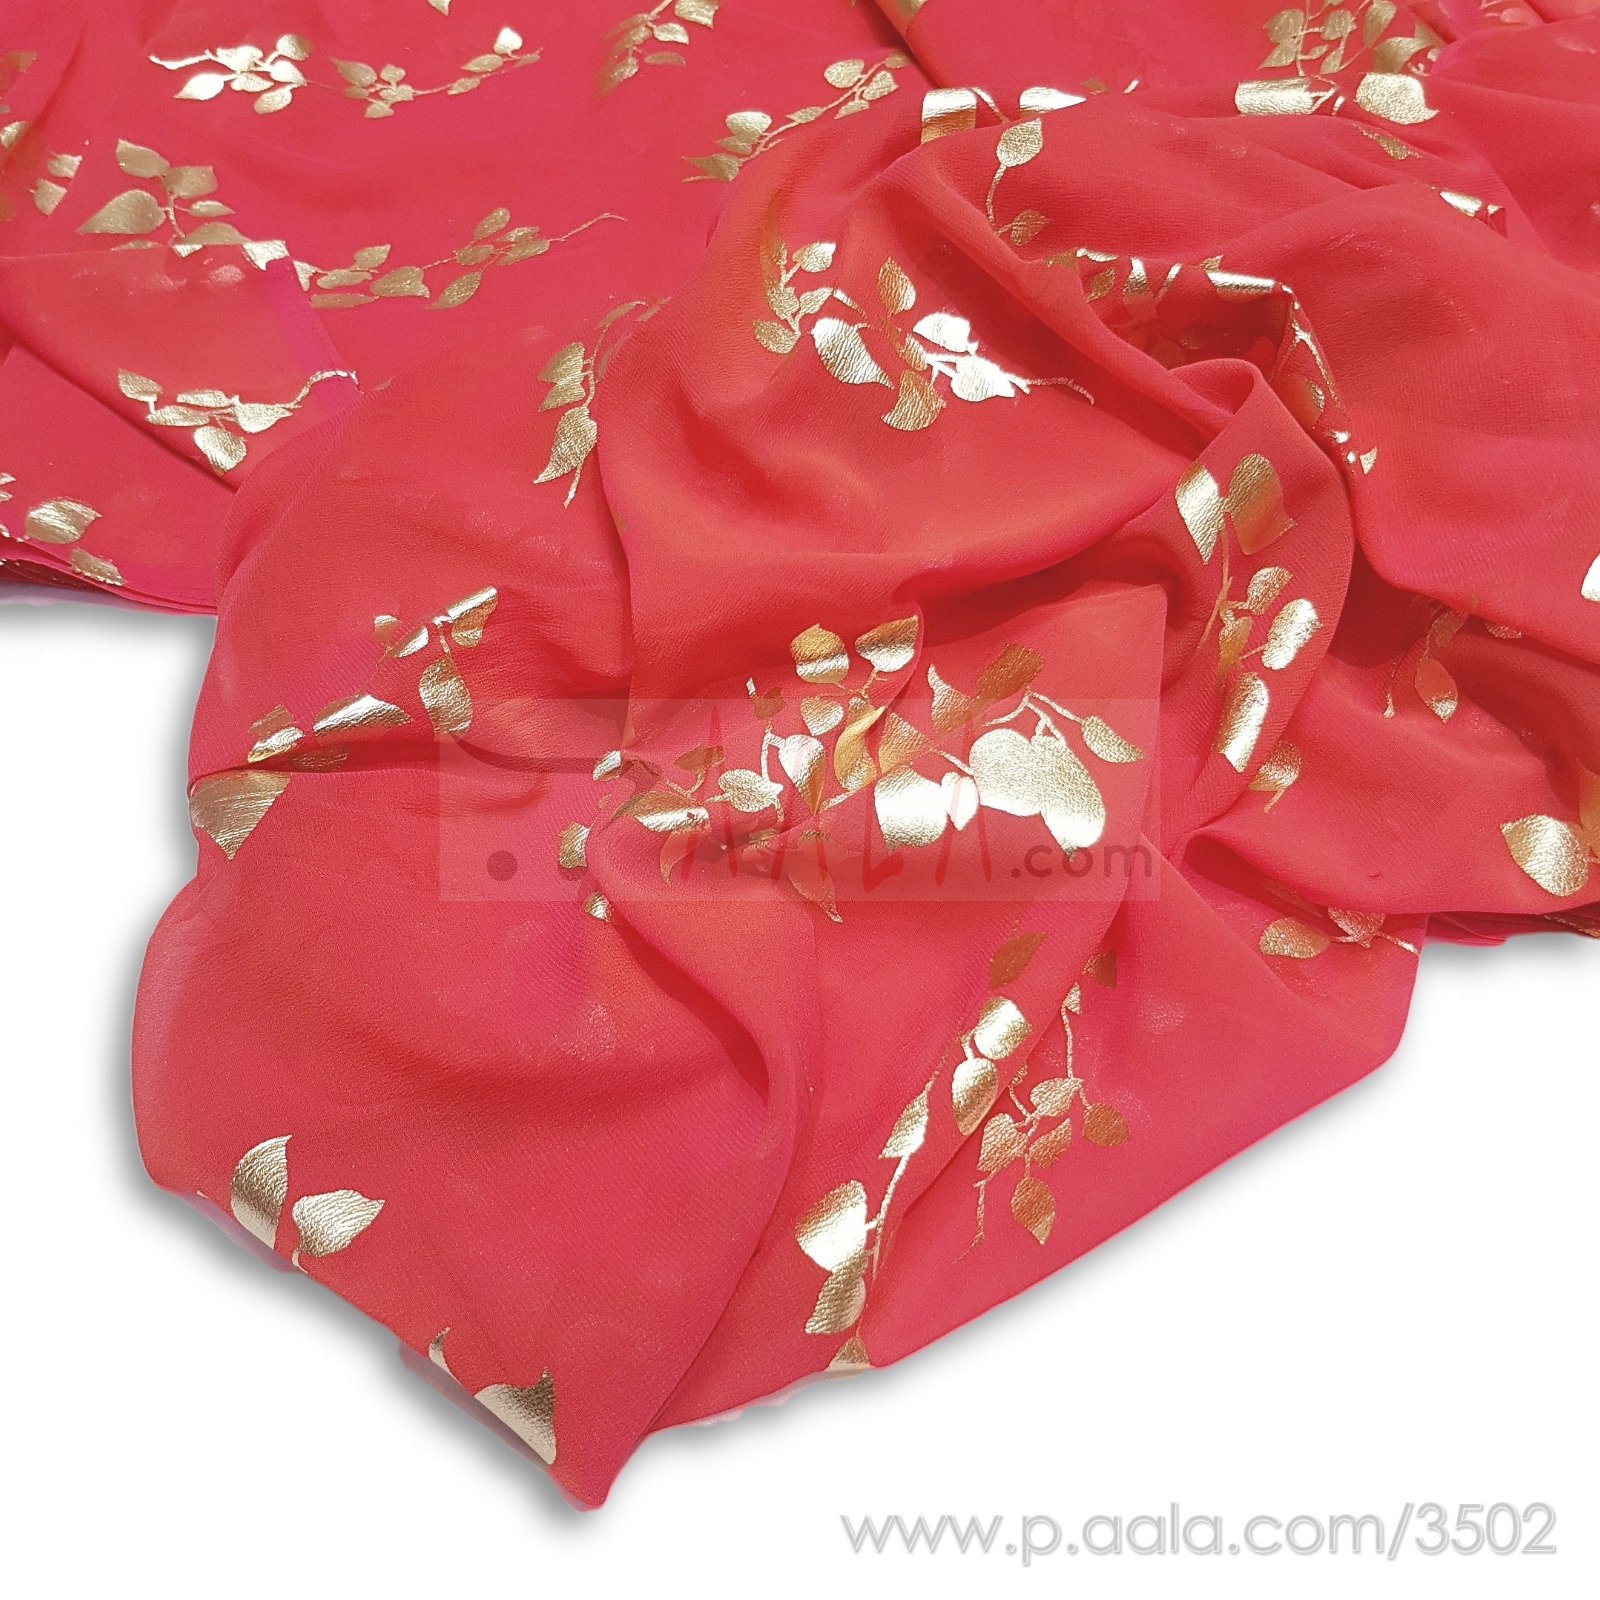 Foil Two Tone Georgette Poly-ester 44 Inches Dyed Per Metre #3502